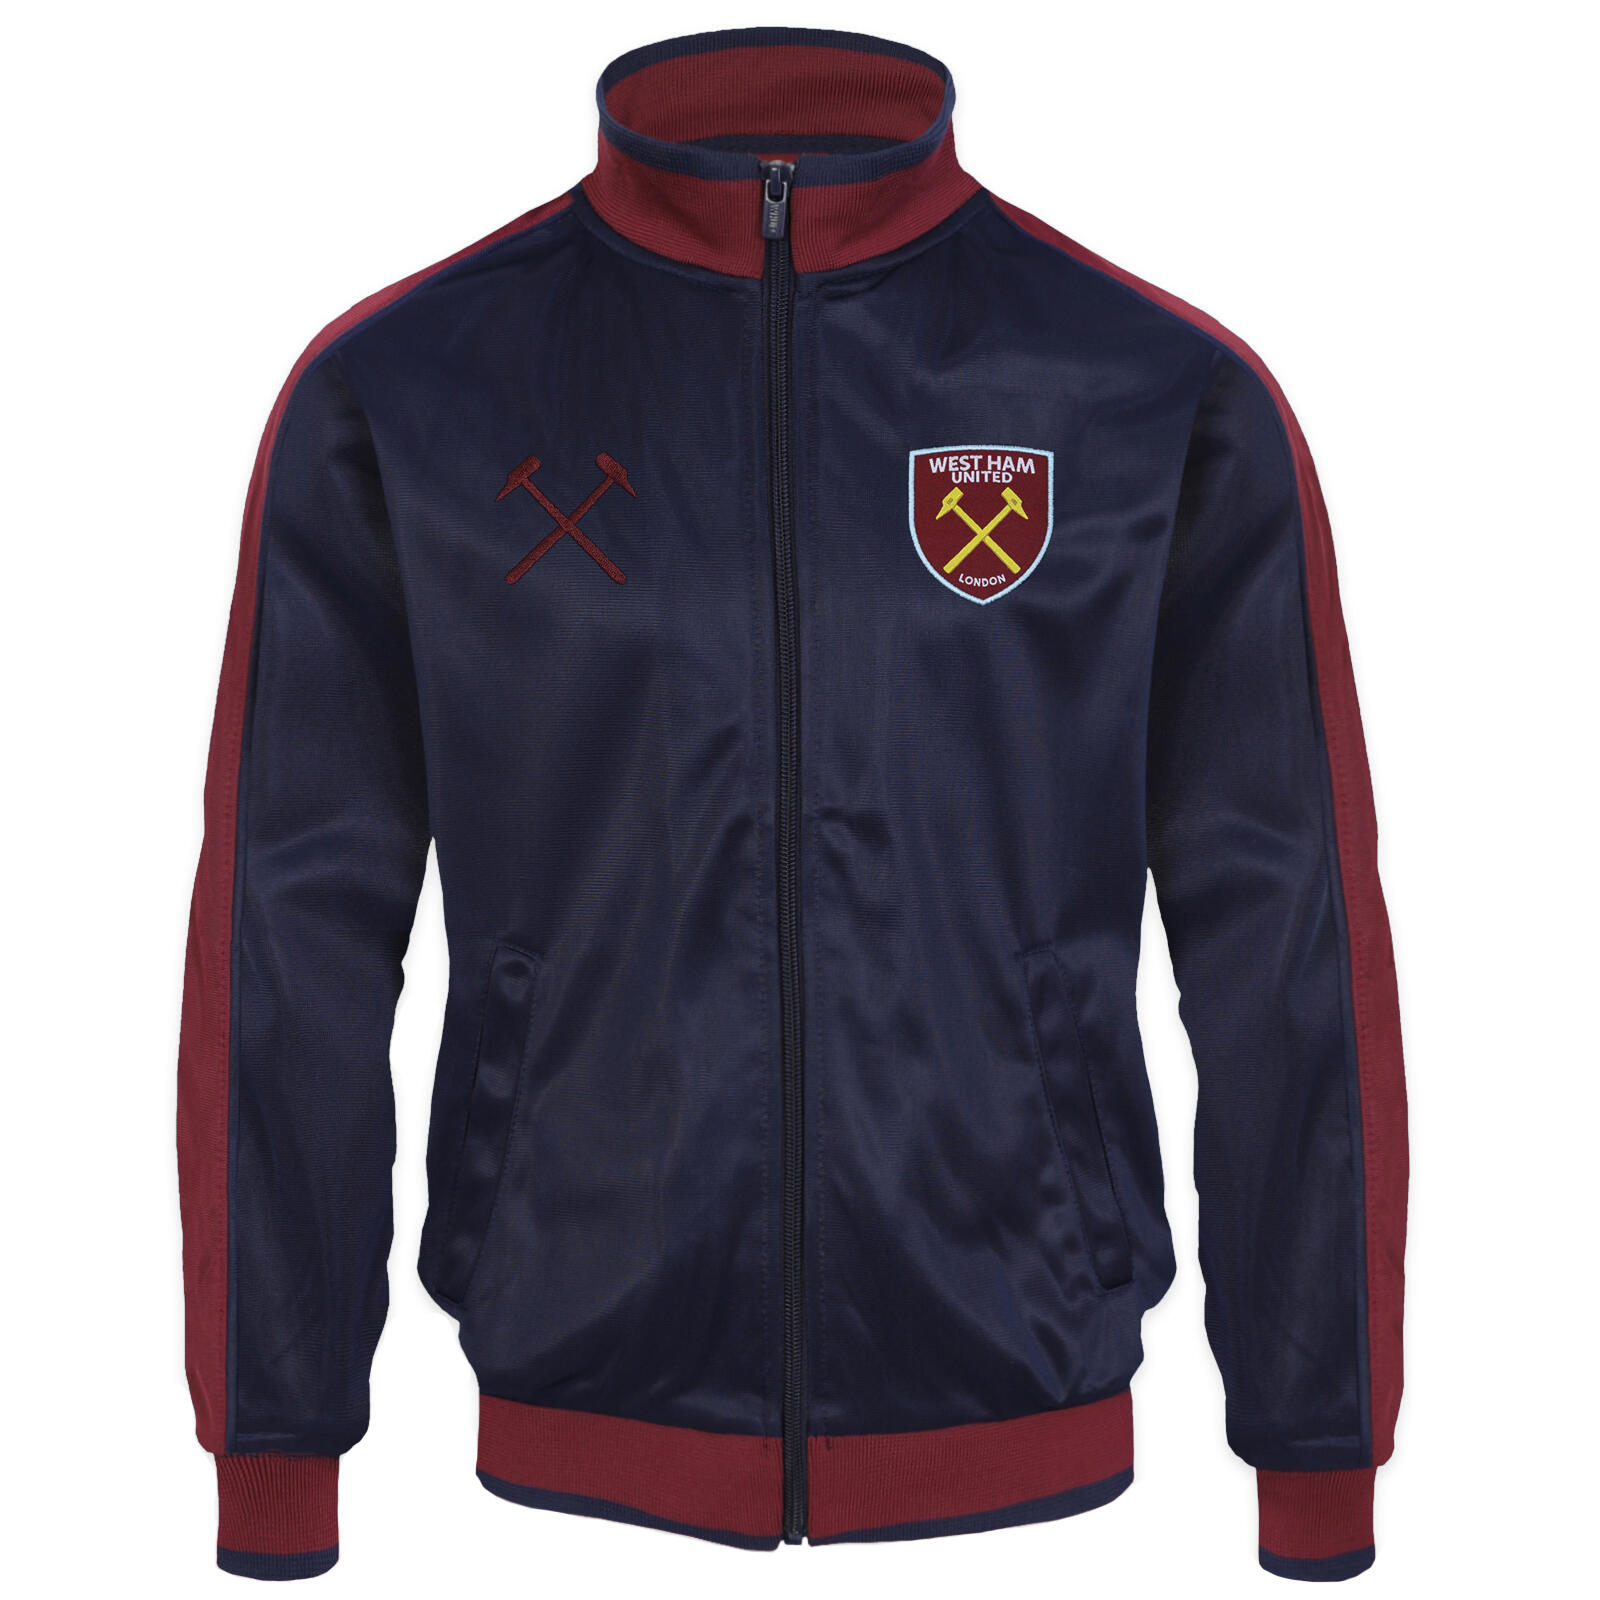 West Ham United Mens Jacket Track Top Retro OFFICIAL Football Gift 1/6